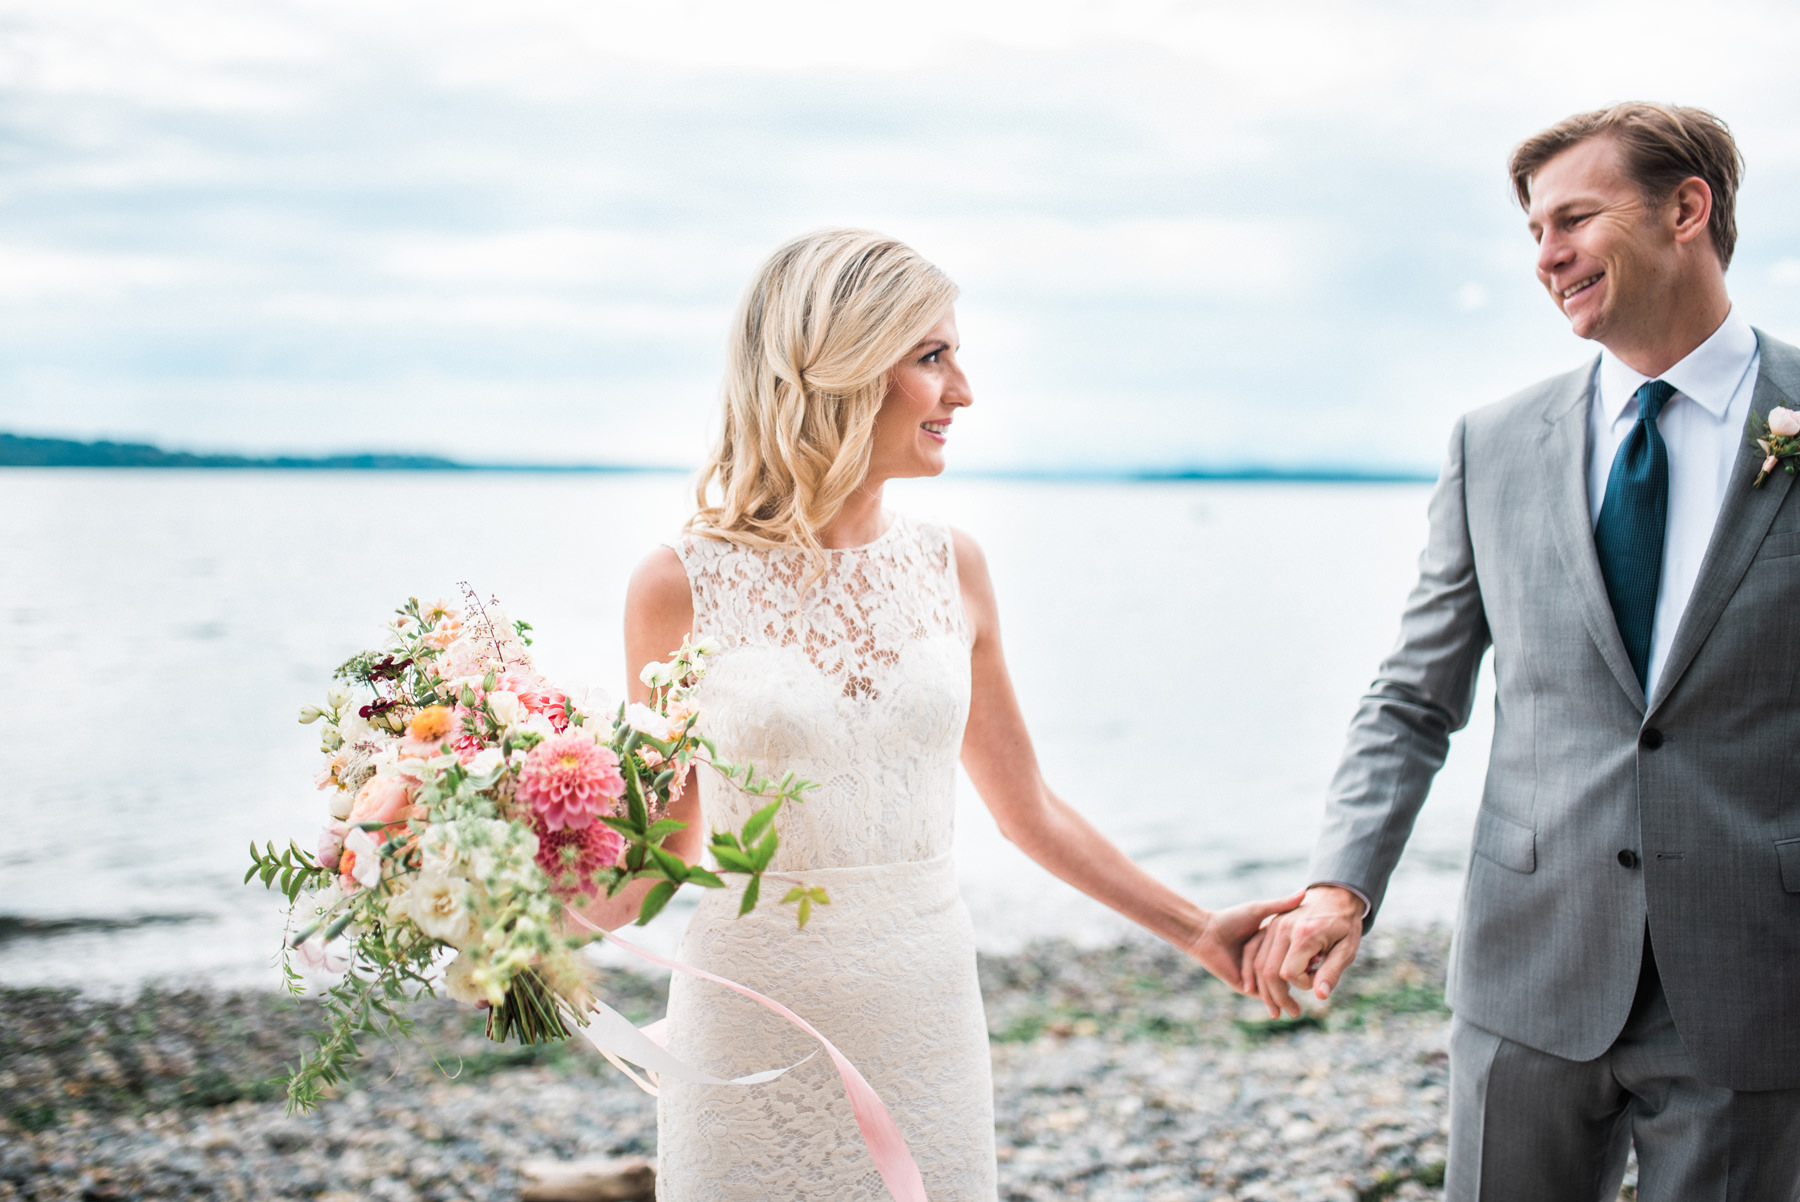 182-wedding-couple-walking-on-driftwood-holding-flowers-by-floret-floral.jpg